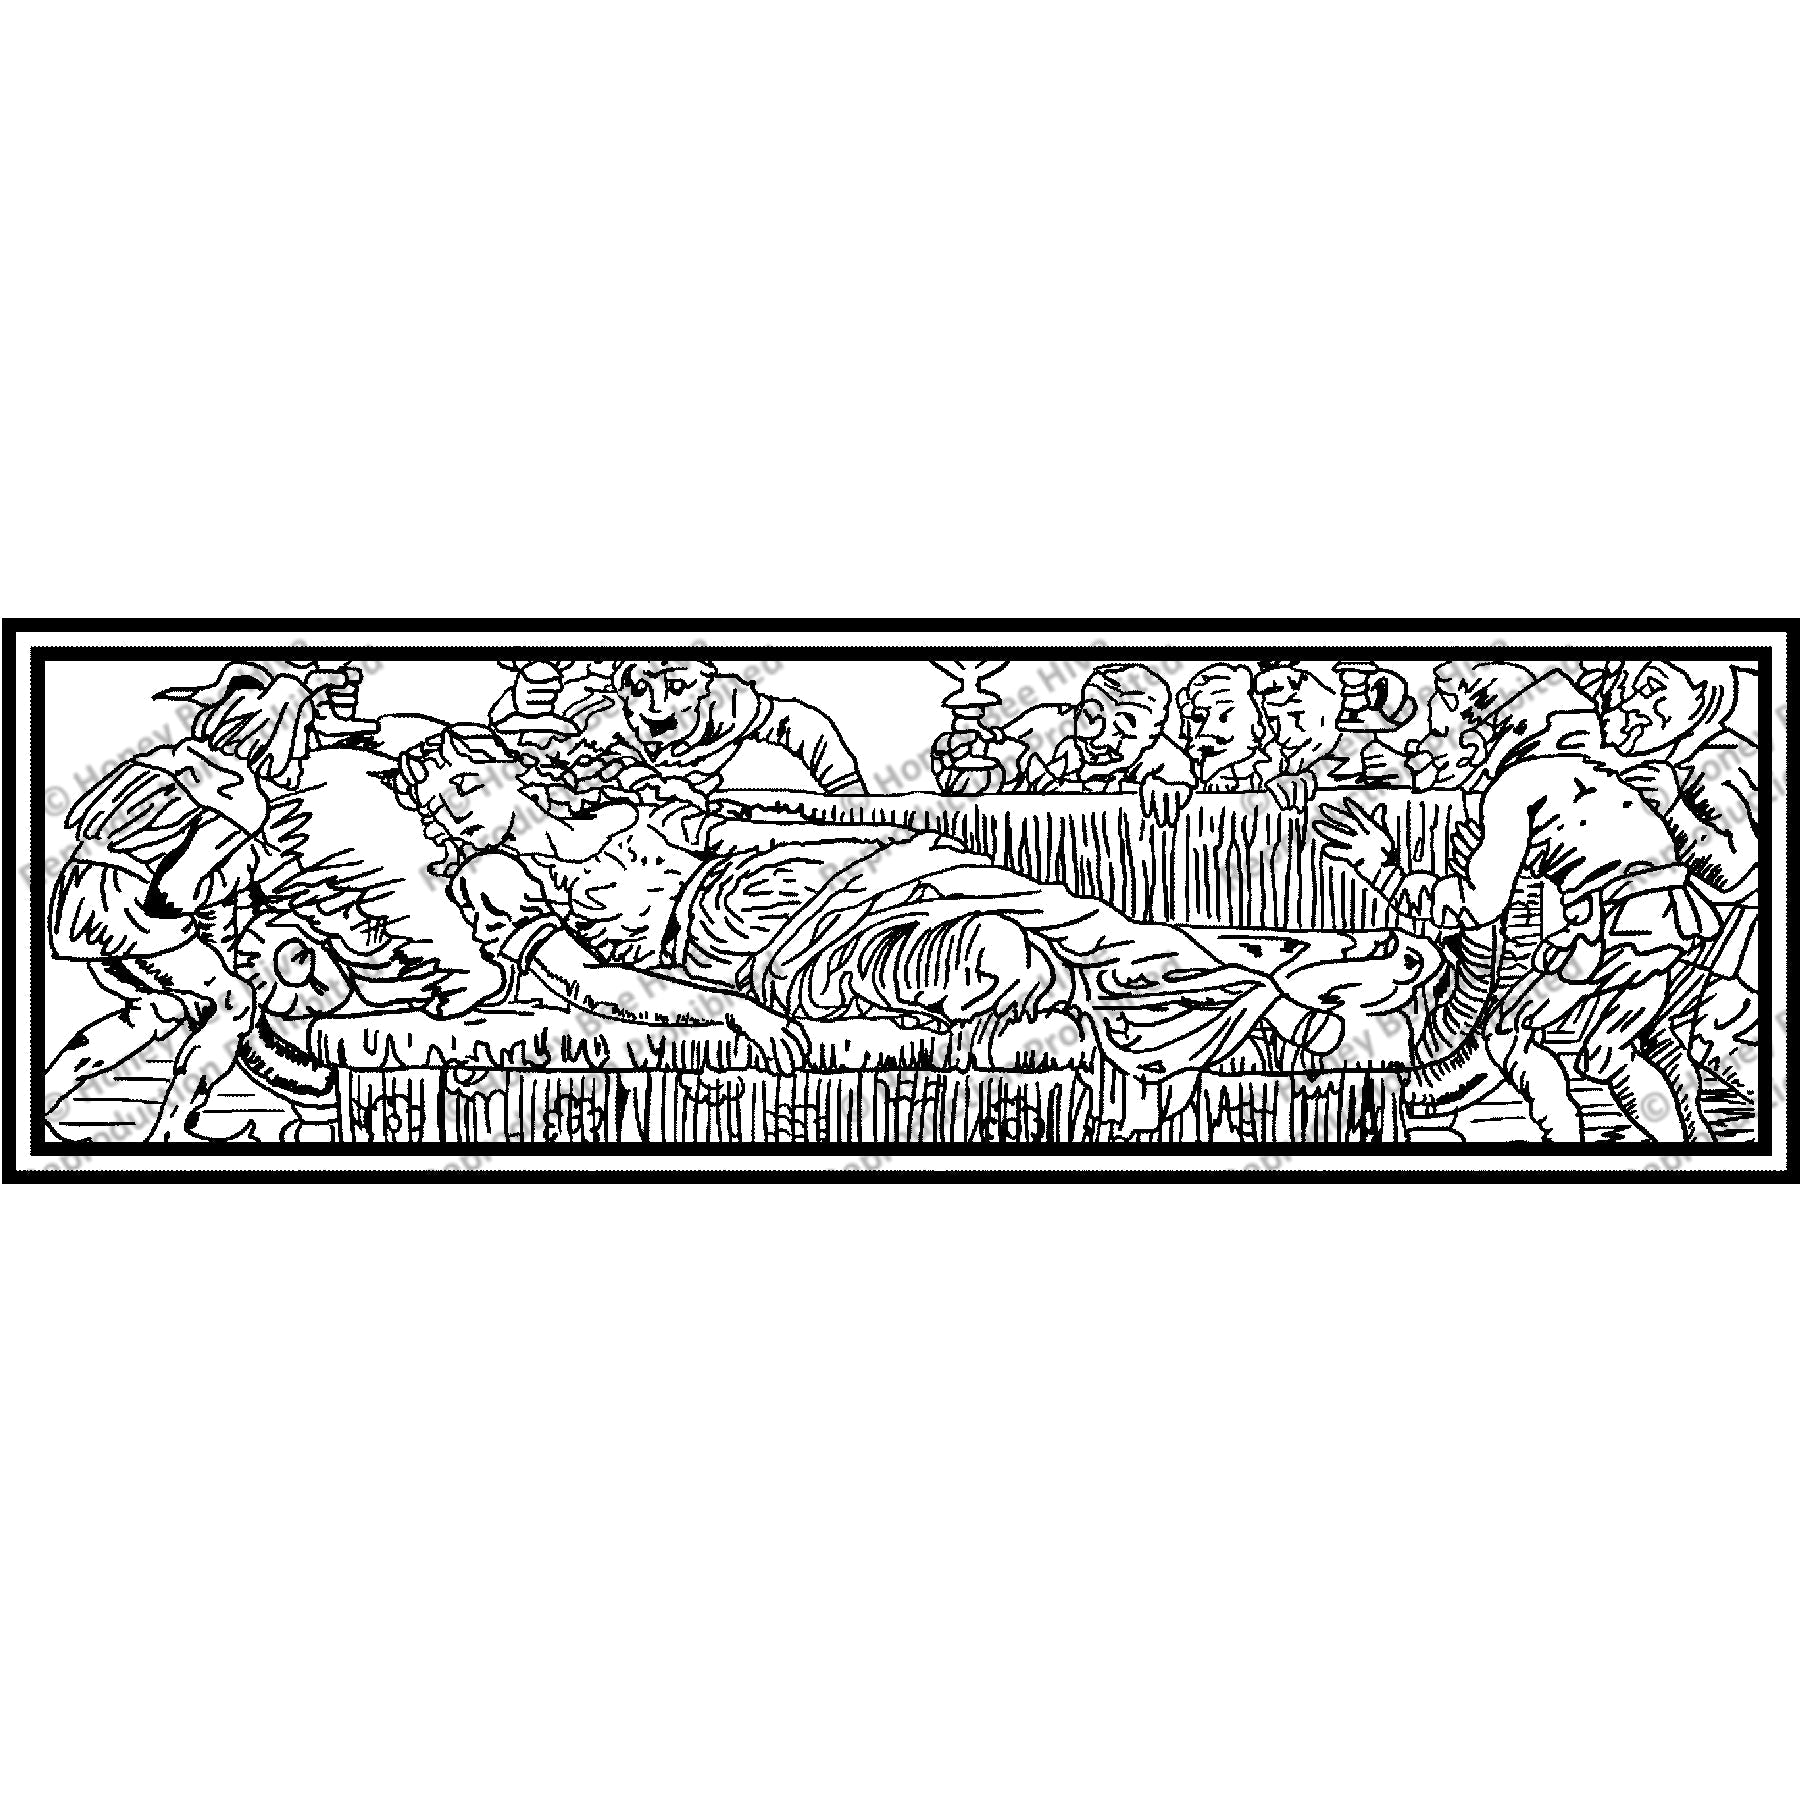 Snow White and the Seven Dwarfs, ill. Walter Crane, 1866, rug hooking pattern